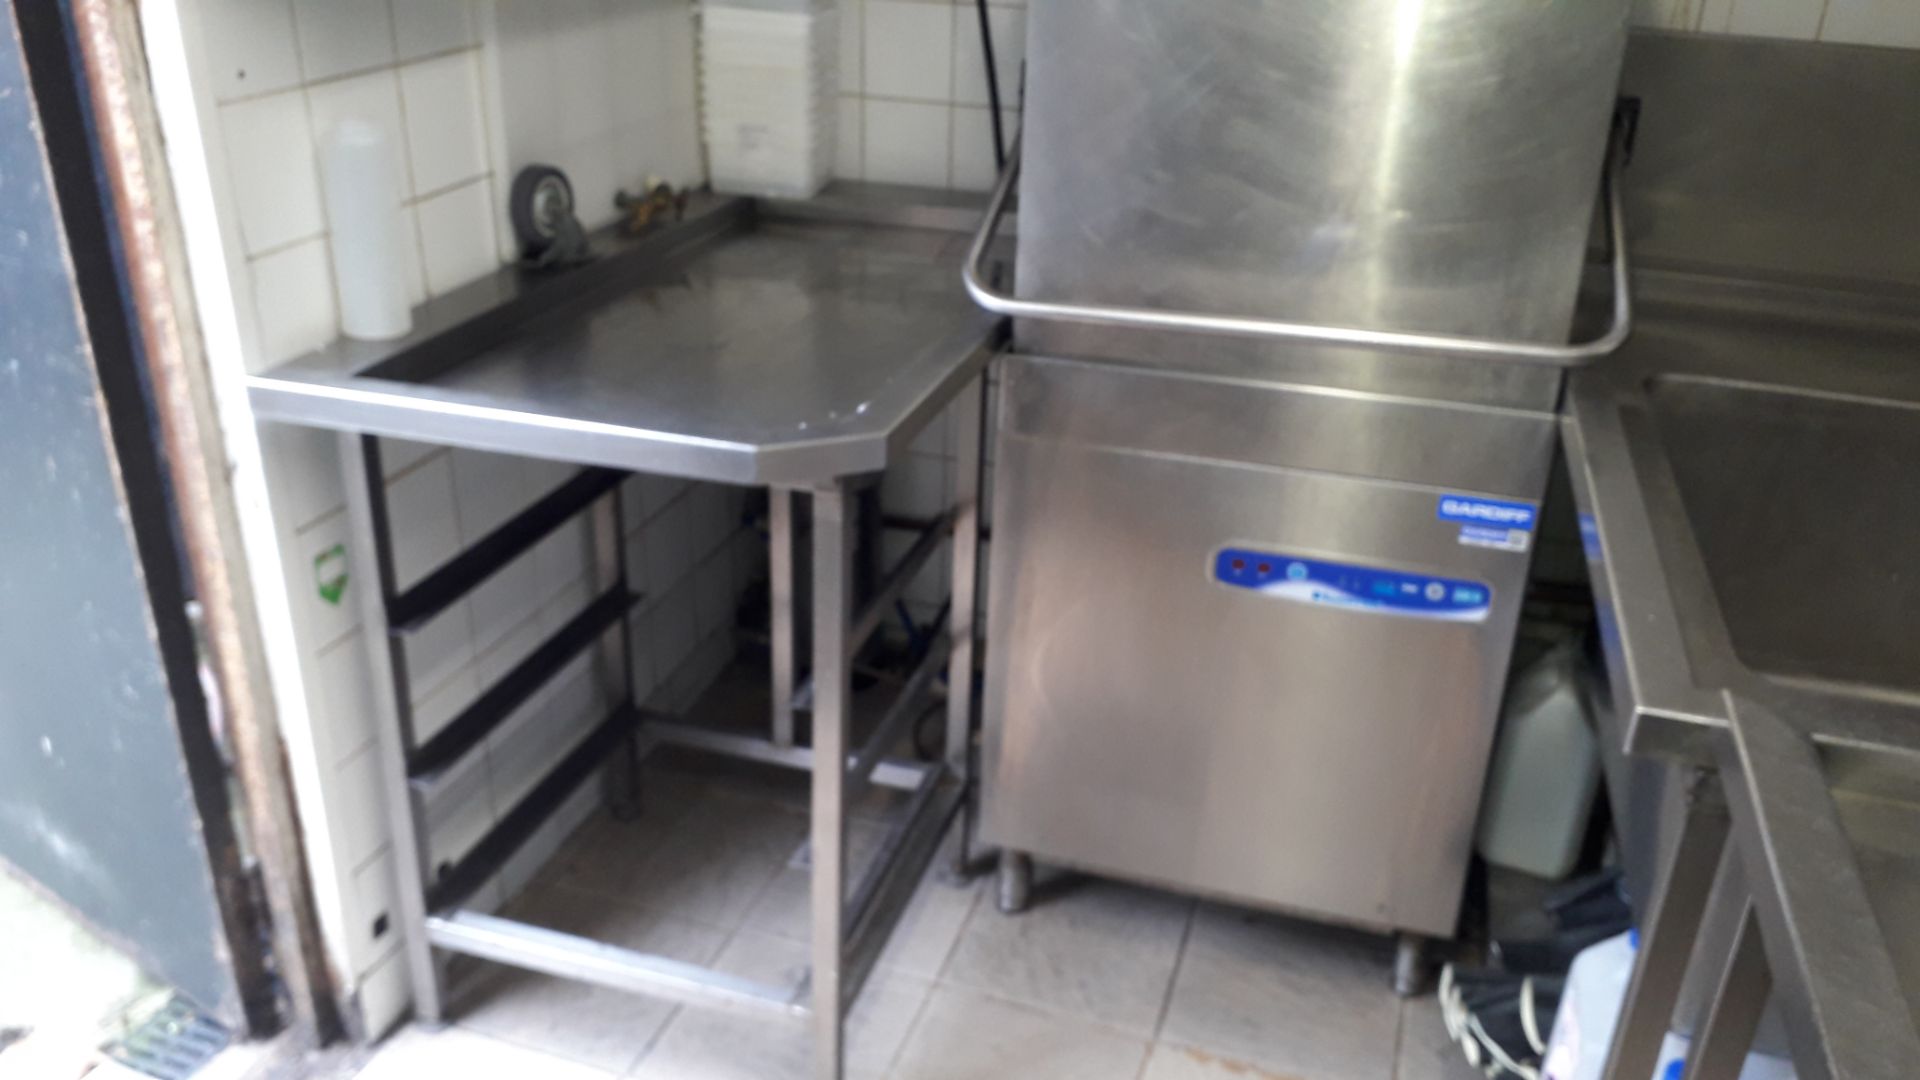 Hoonved CAP7E11 Pass Through Dishwasher Serial Number GB1803890318 with Feed Table, fitted Sink with - Image 6 of 9